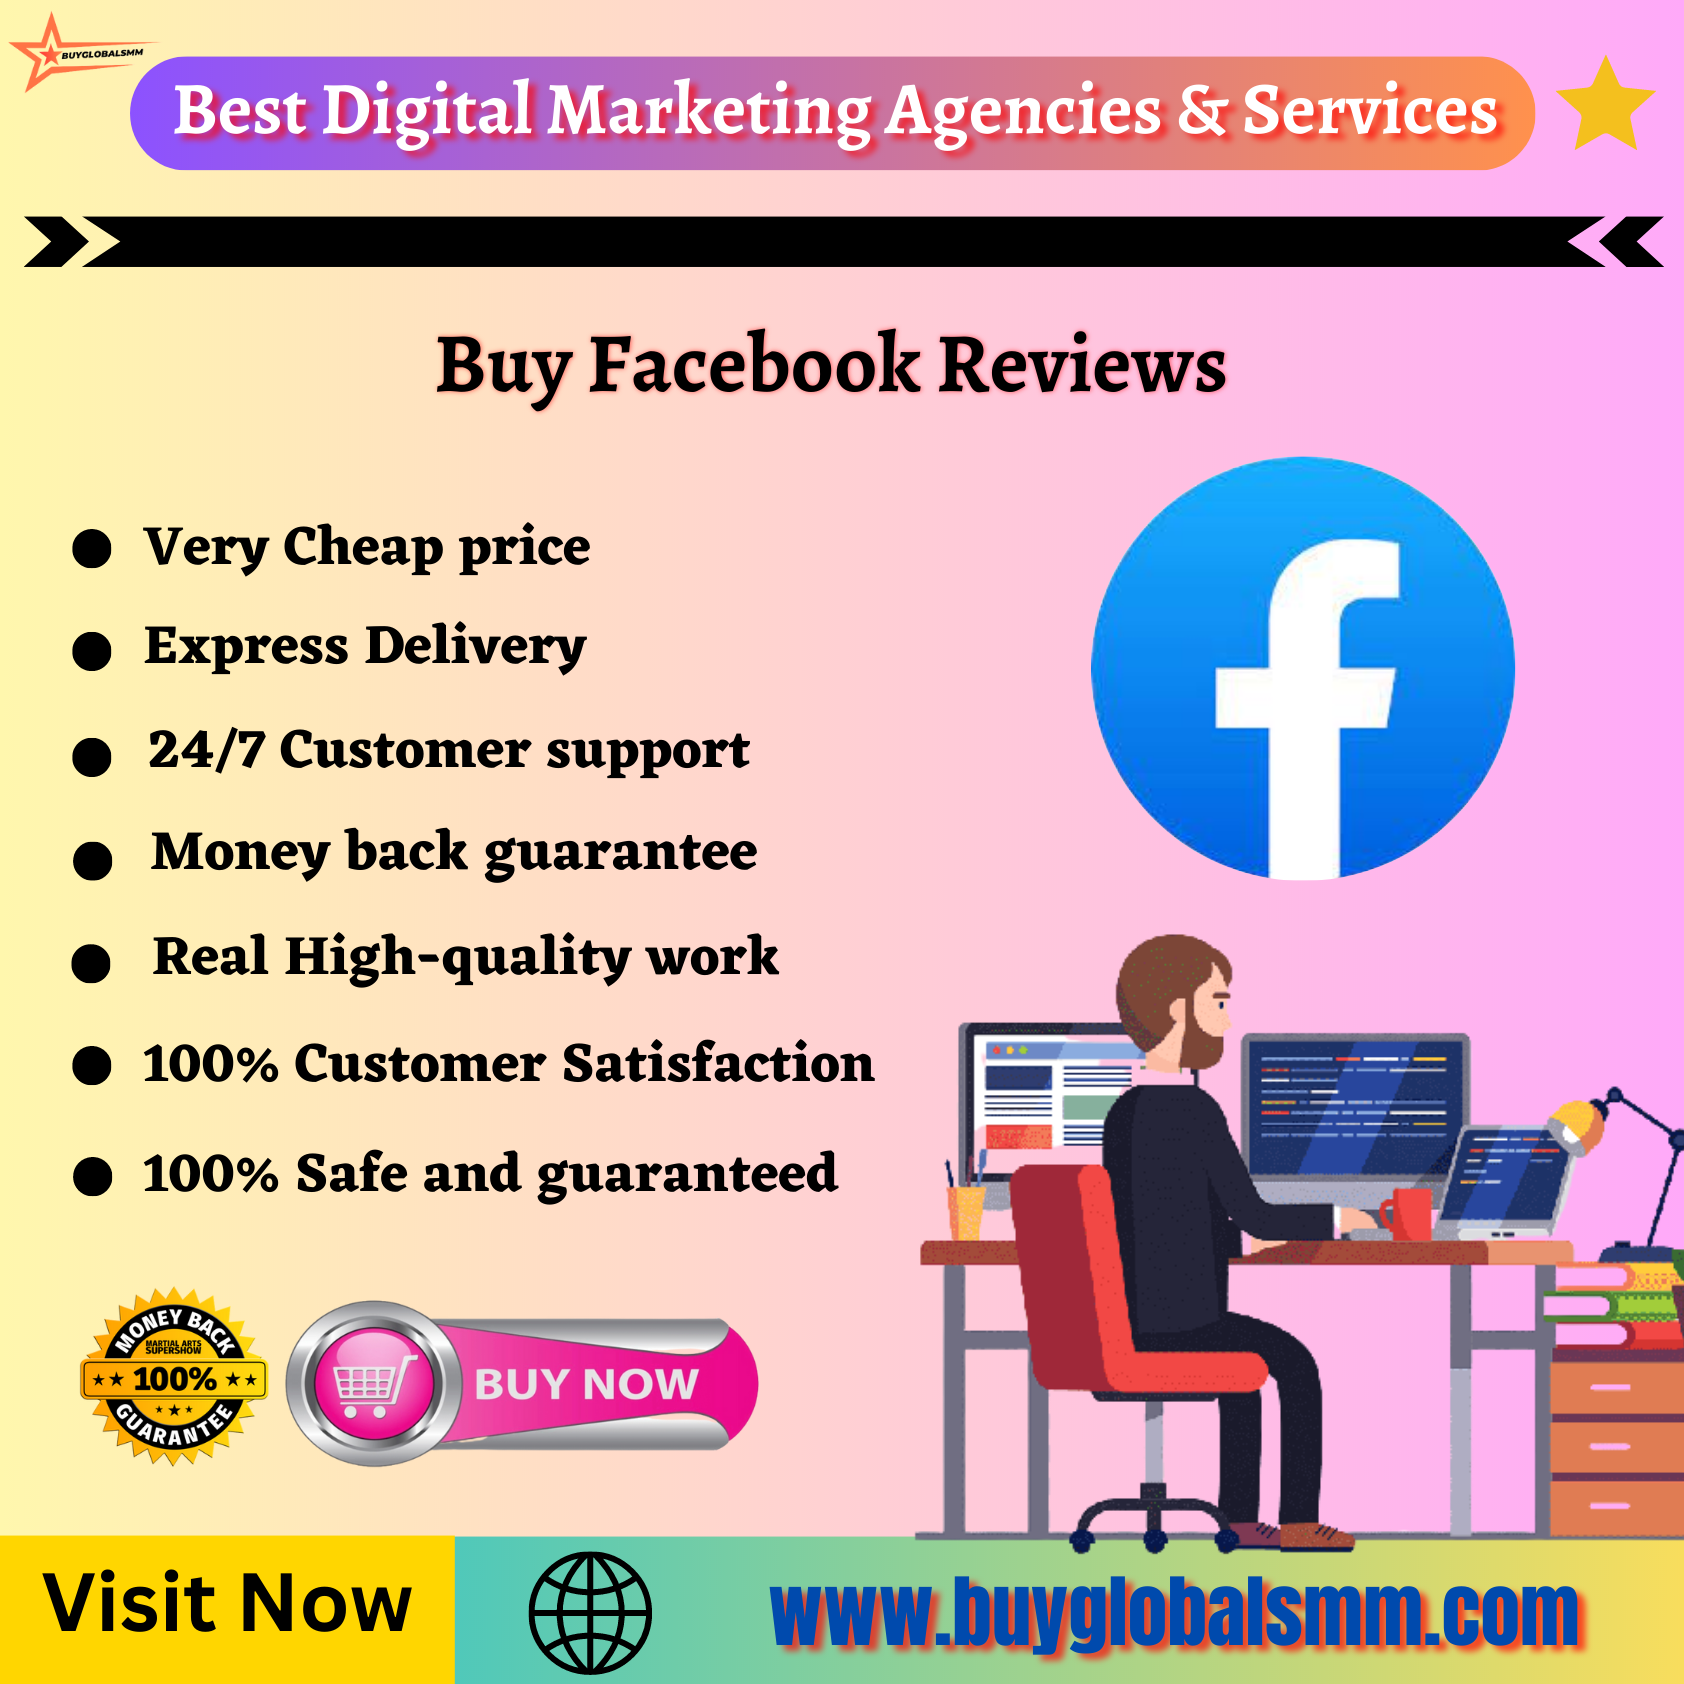 Buy Facebook Reviews-100% trusted reviews, and cheap...